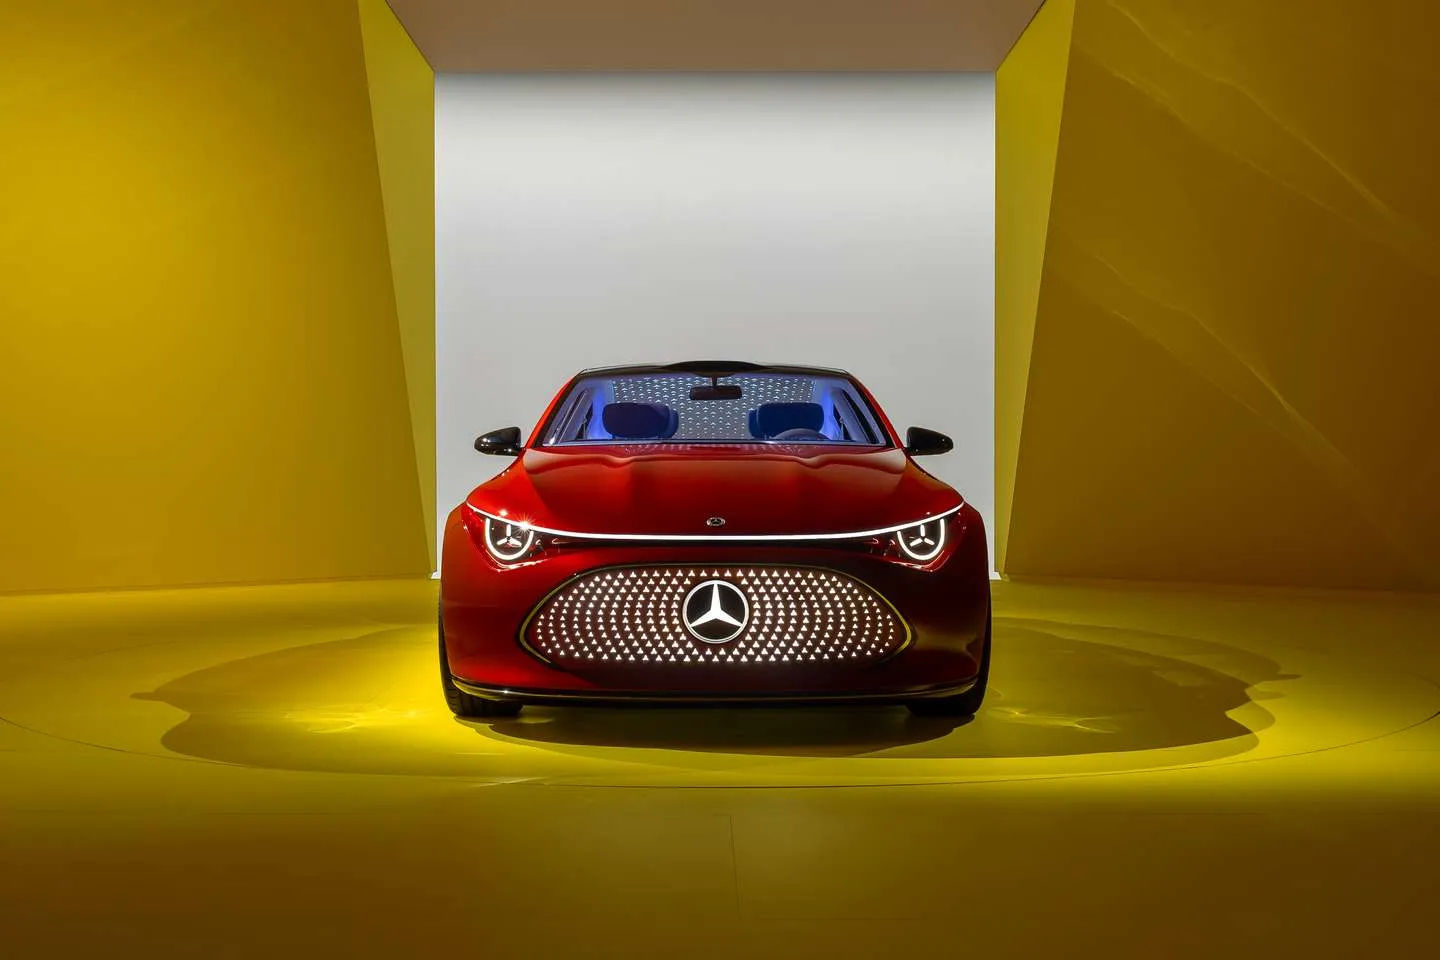 The Mercedes-Benz Concept CLA Class shows that entry-level can rhyme with advanced